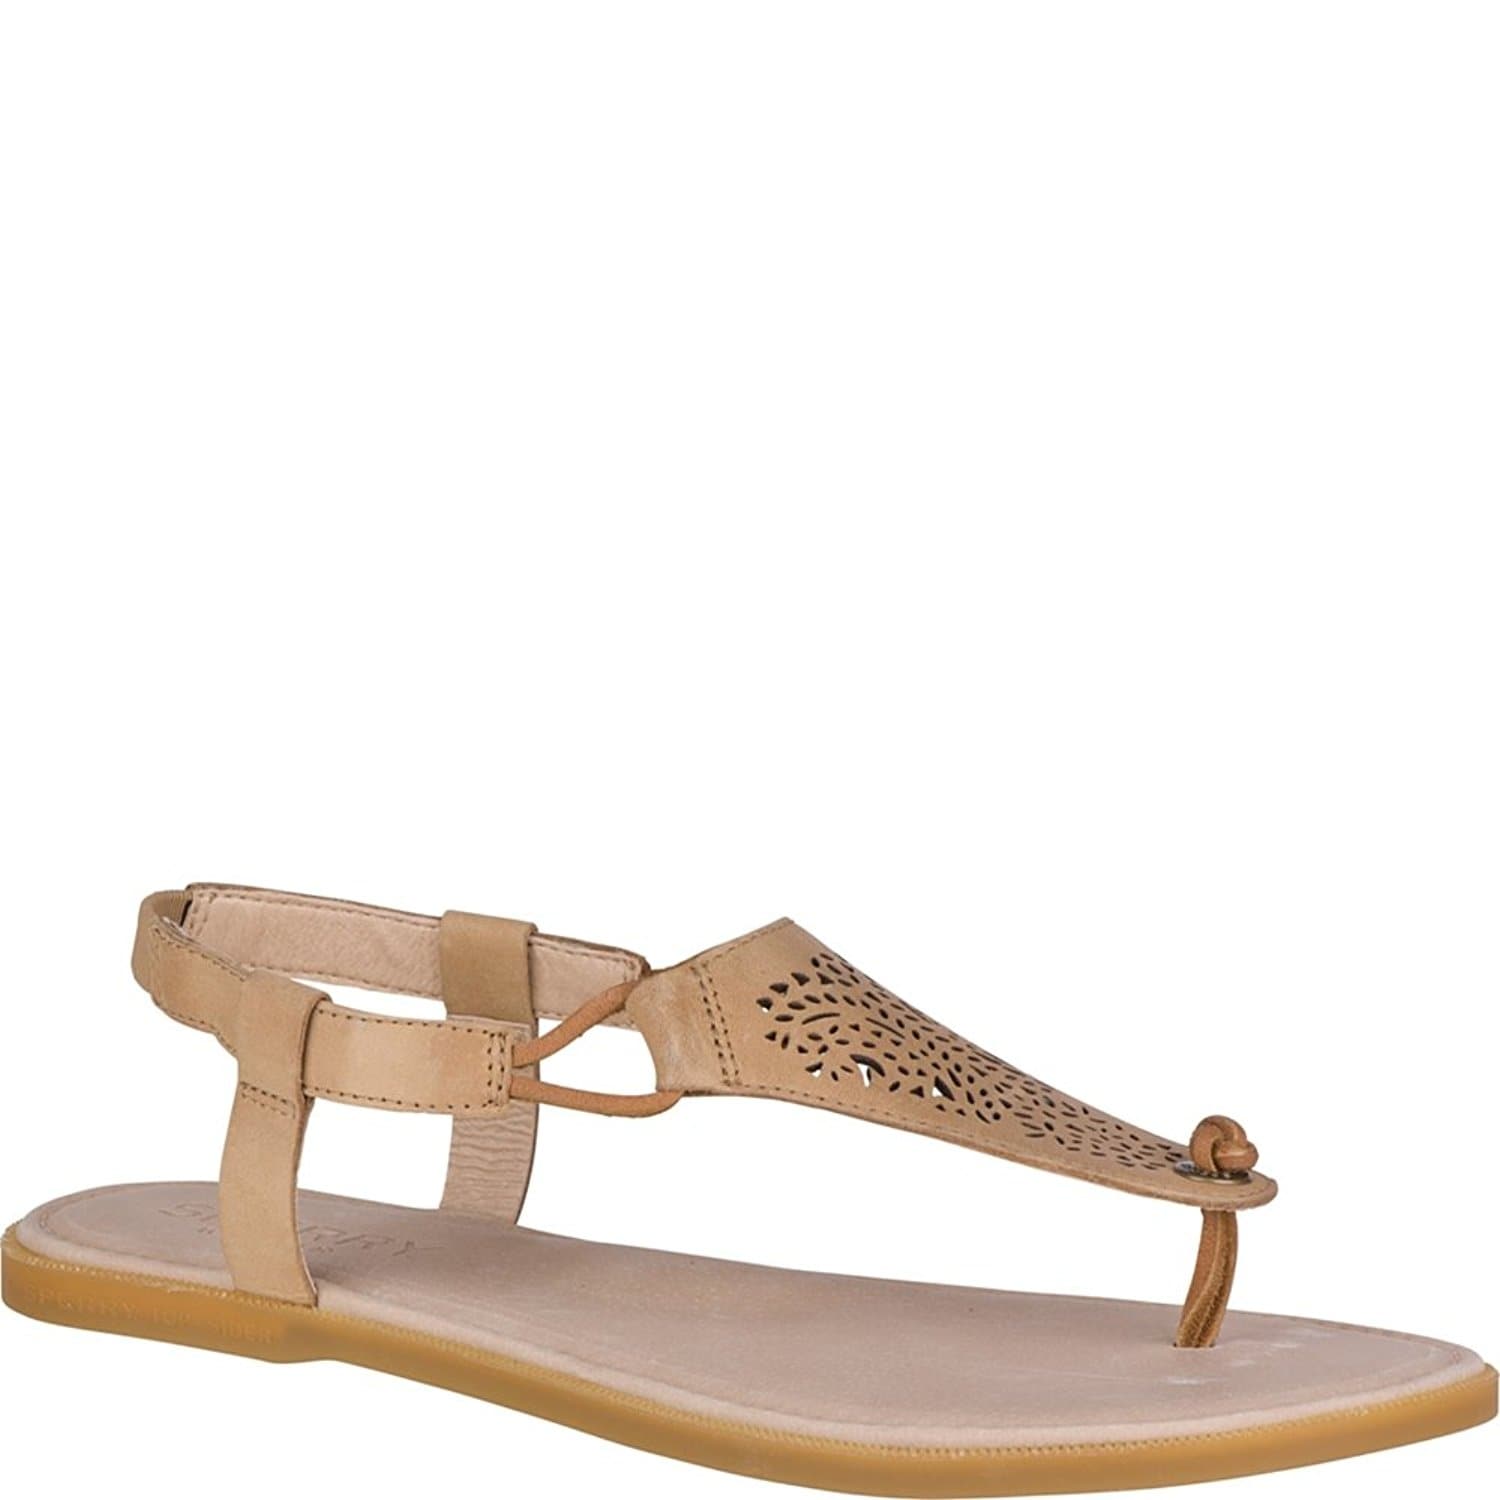 sperry top sider sandals womens